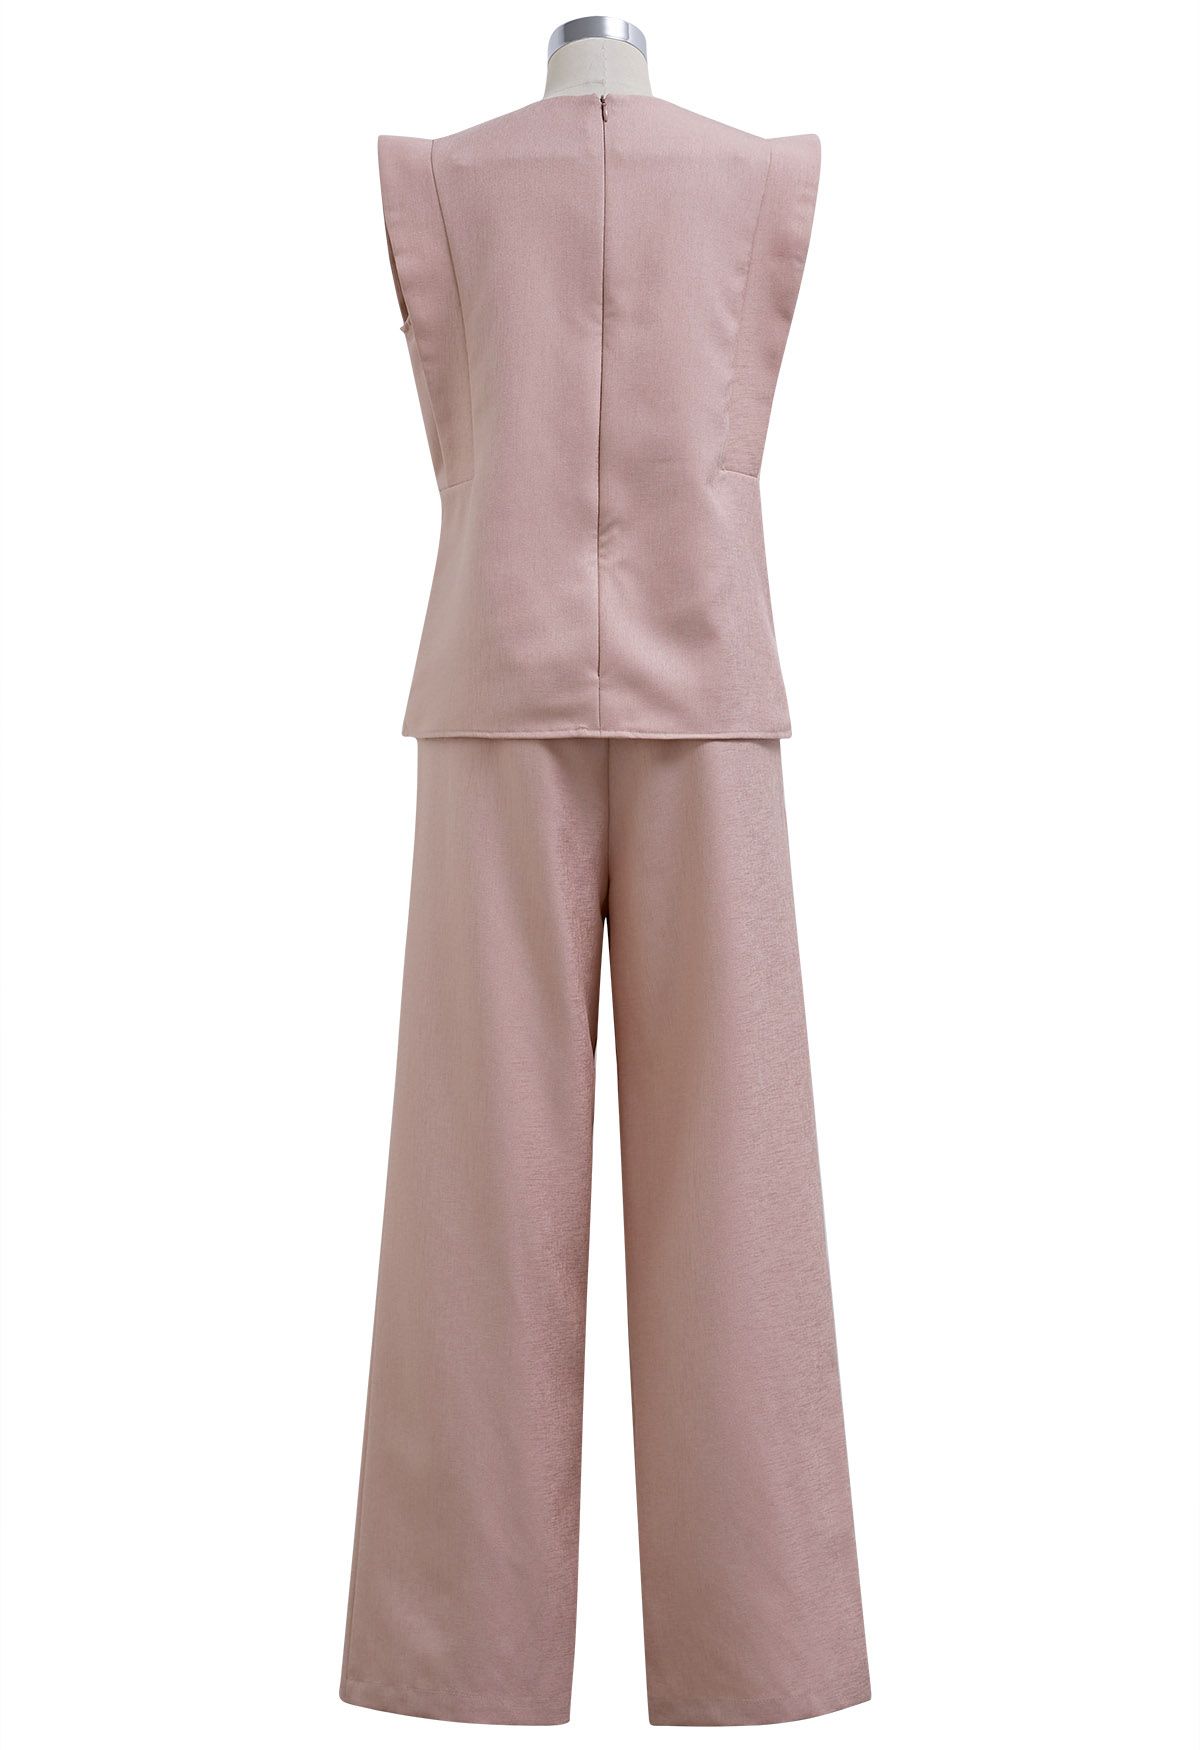 Chic Sleeveless Top and Flowy Wide-Leg Pants Set in Pink